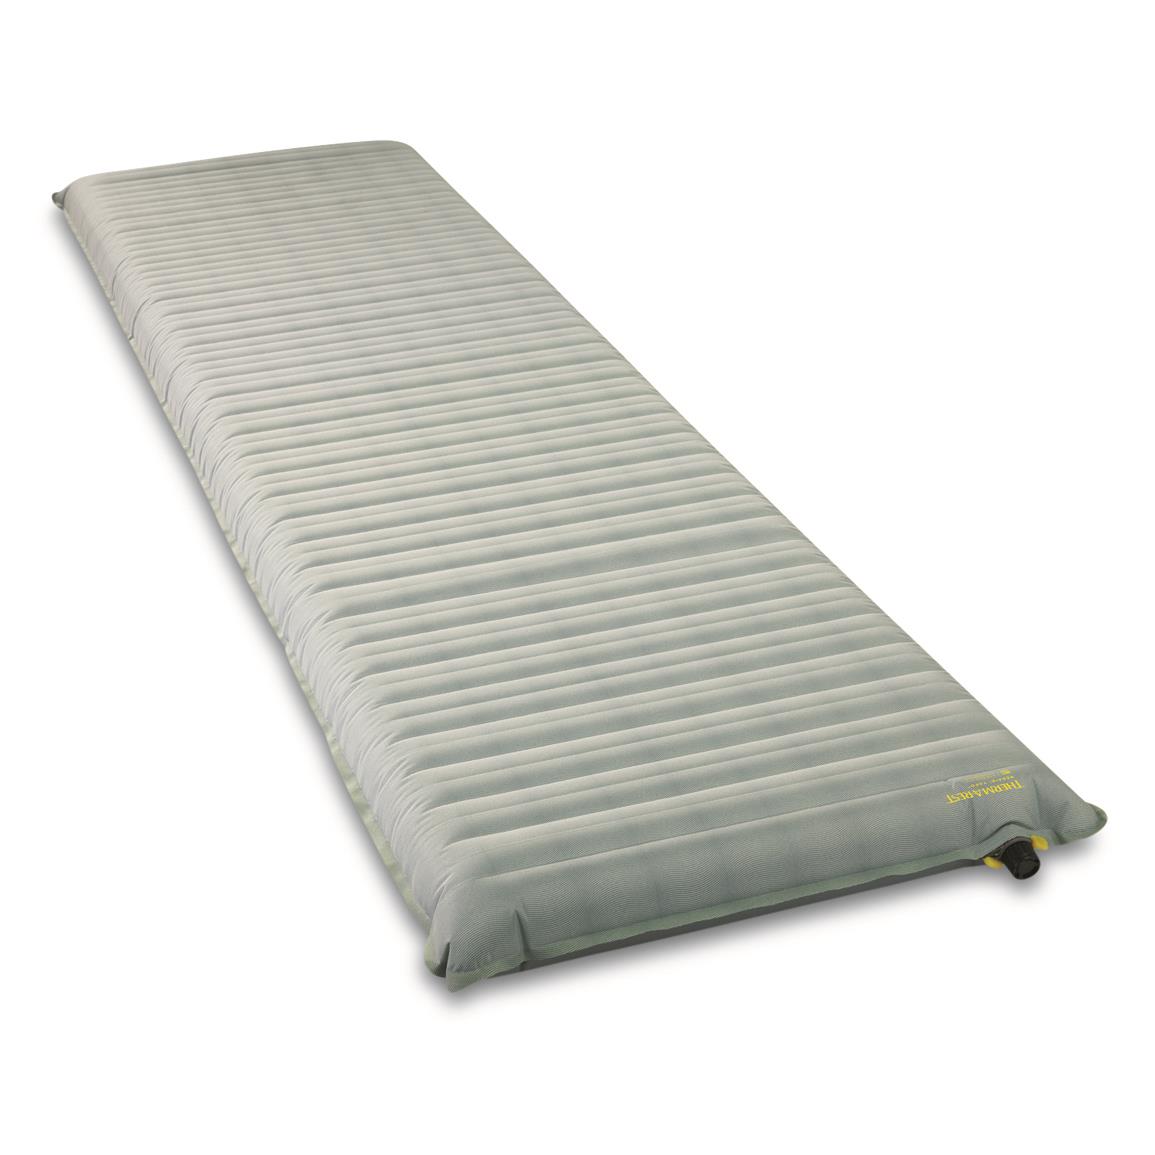 Therm-a-Rest NeoAir Topo Sleeping Pad